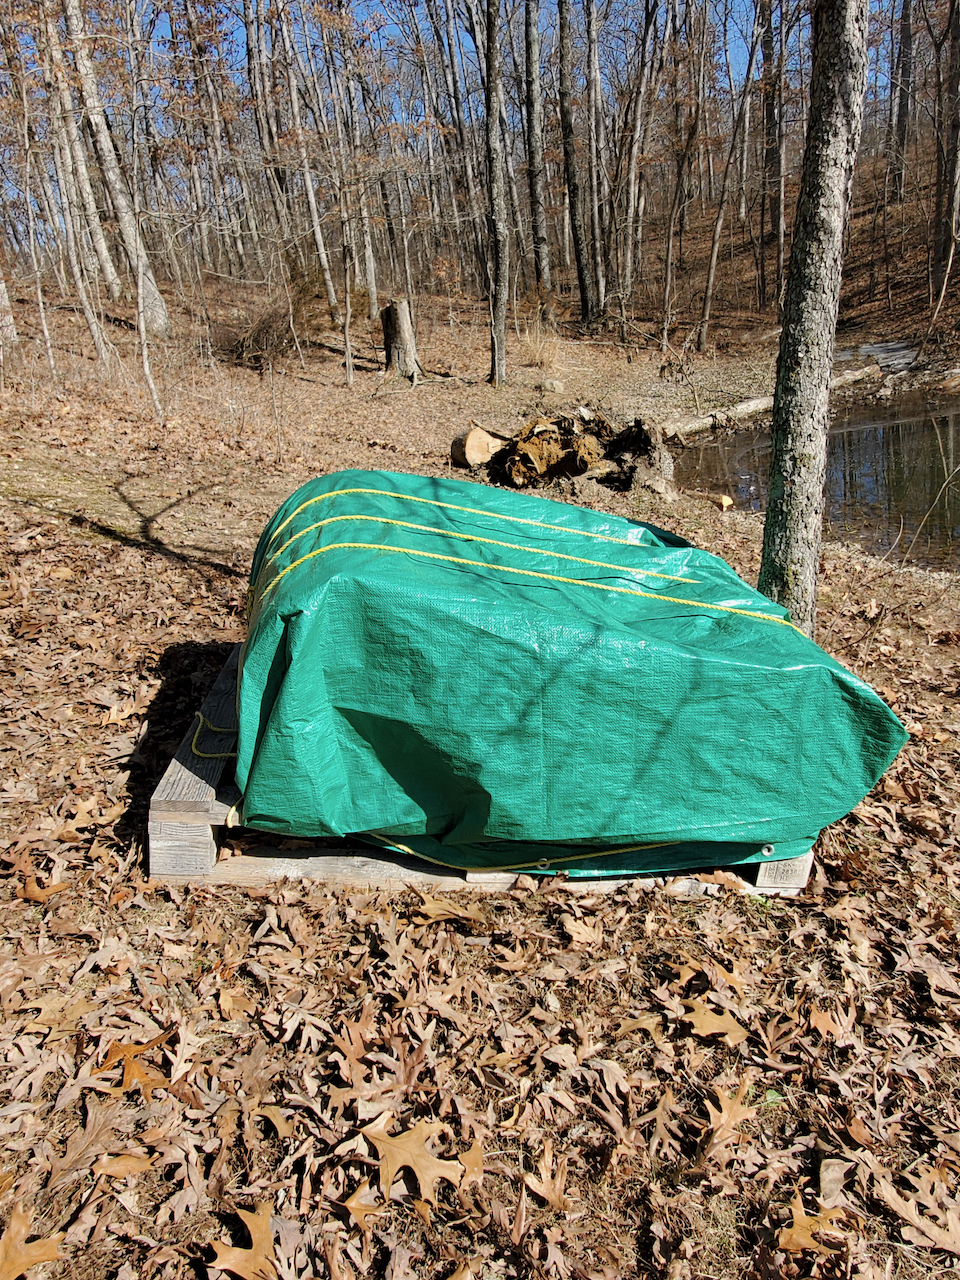 Remaining sections wrapped with a tarp